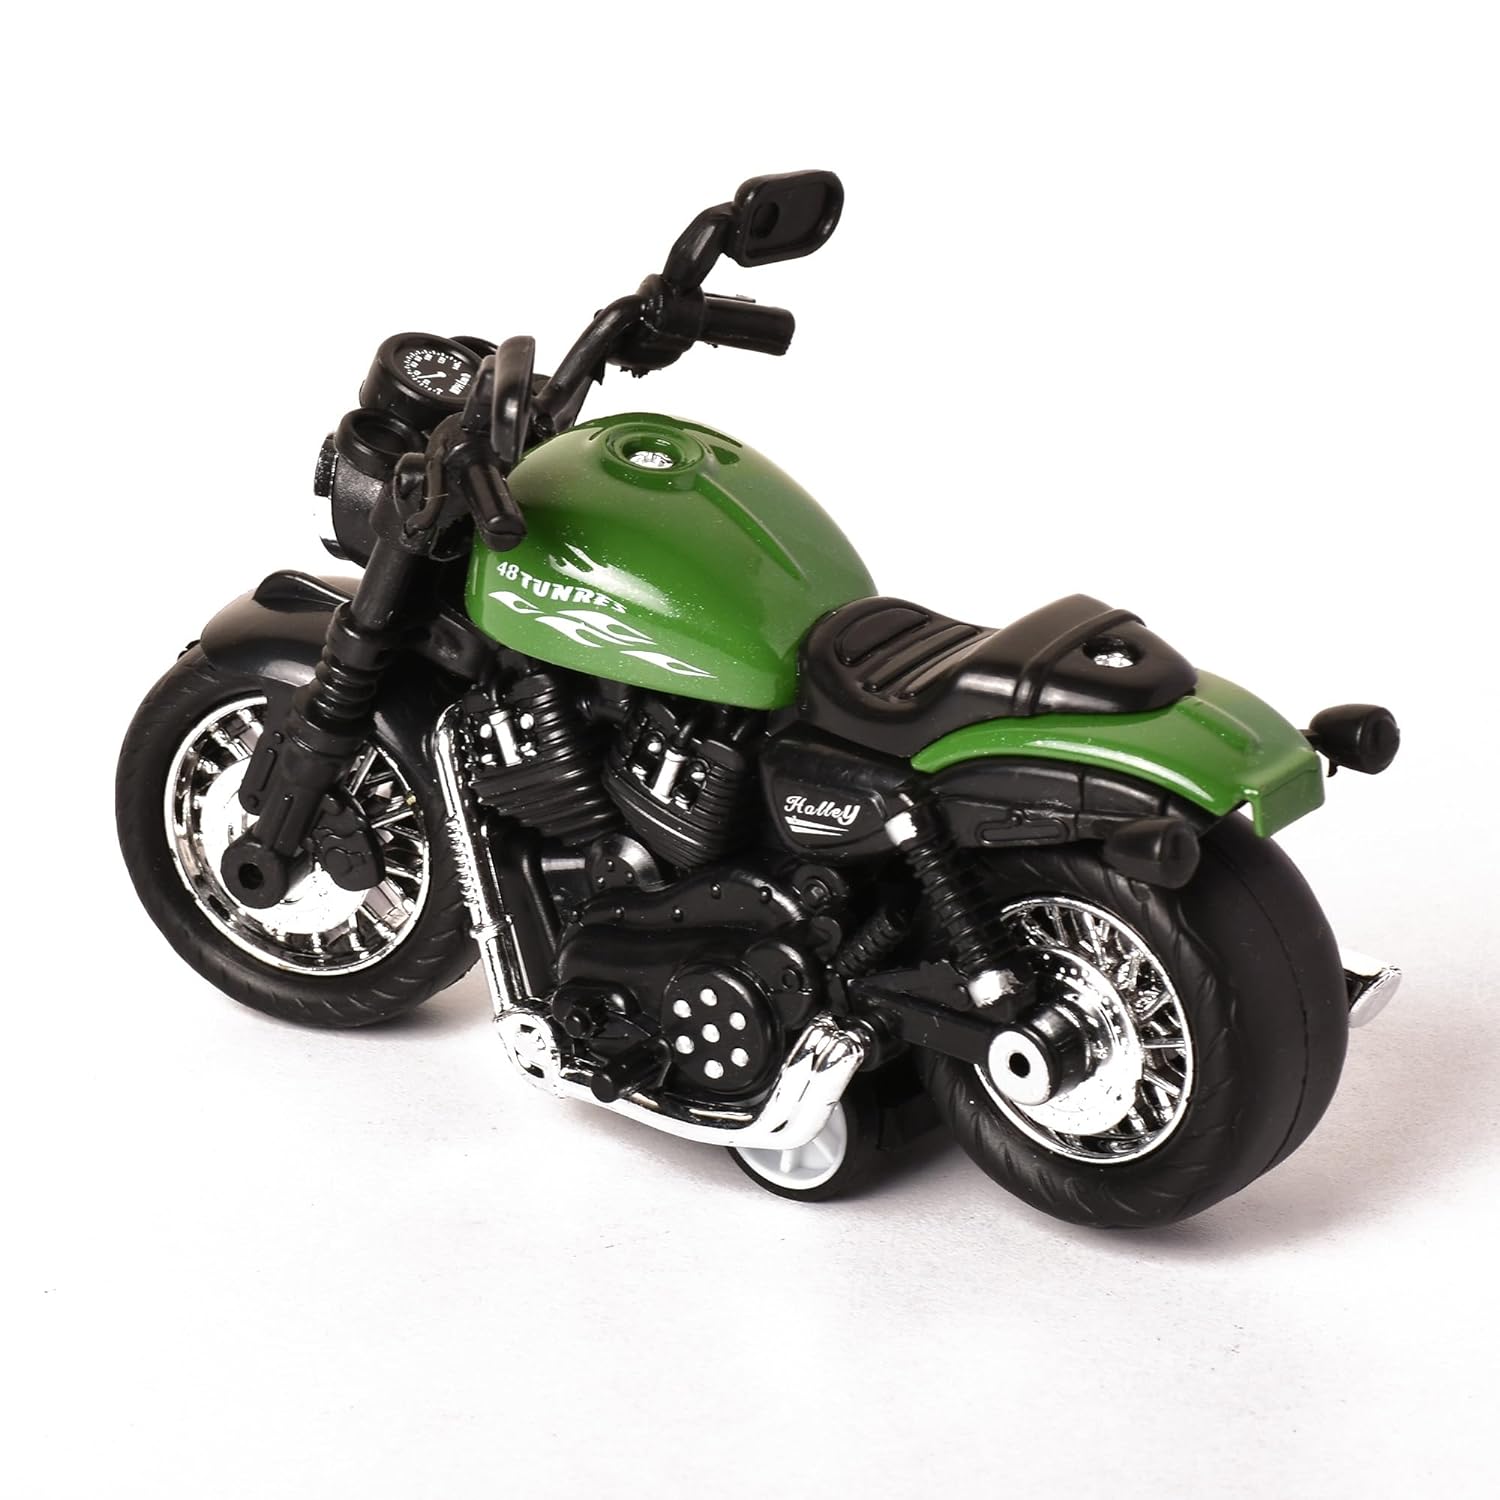 Braintastic Model Diecast Metal Bike Toy Vehicle Pull Back Friction Car with Openable Doors Light & Music Toys for Kids Age 3+ Years (Royal Enfield Green)